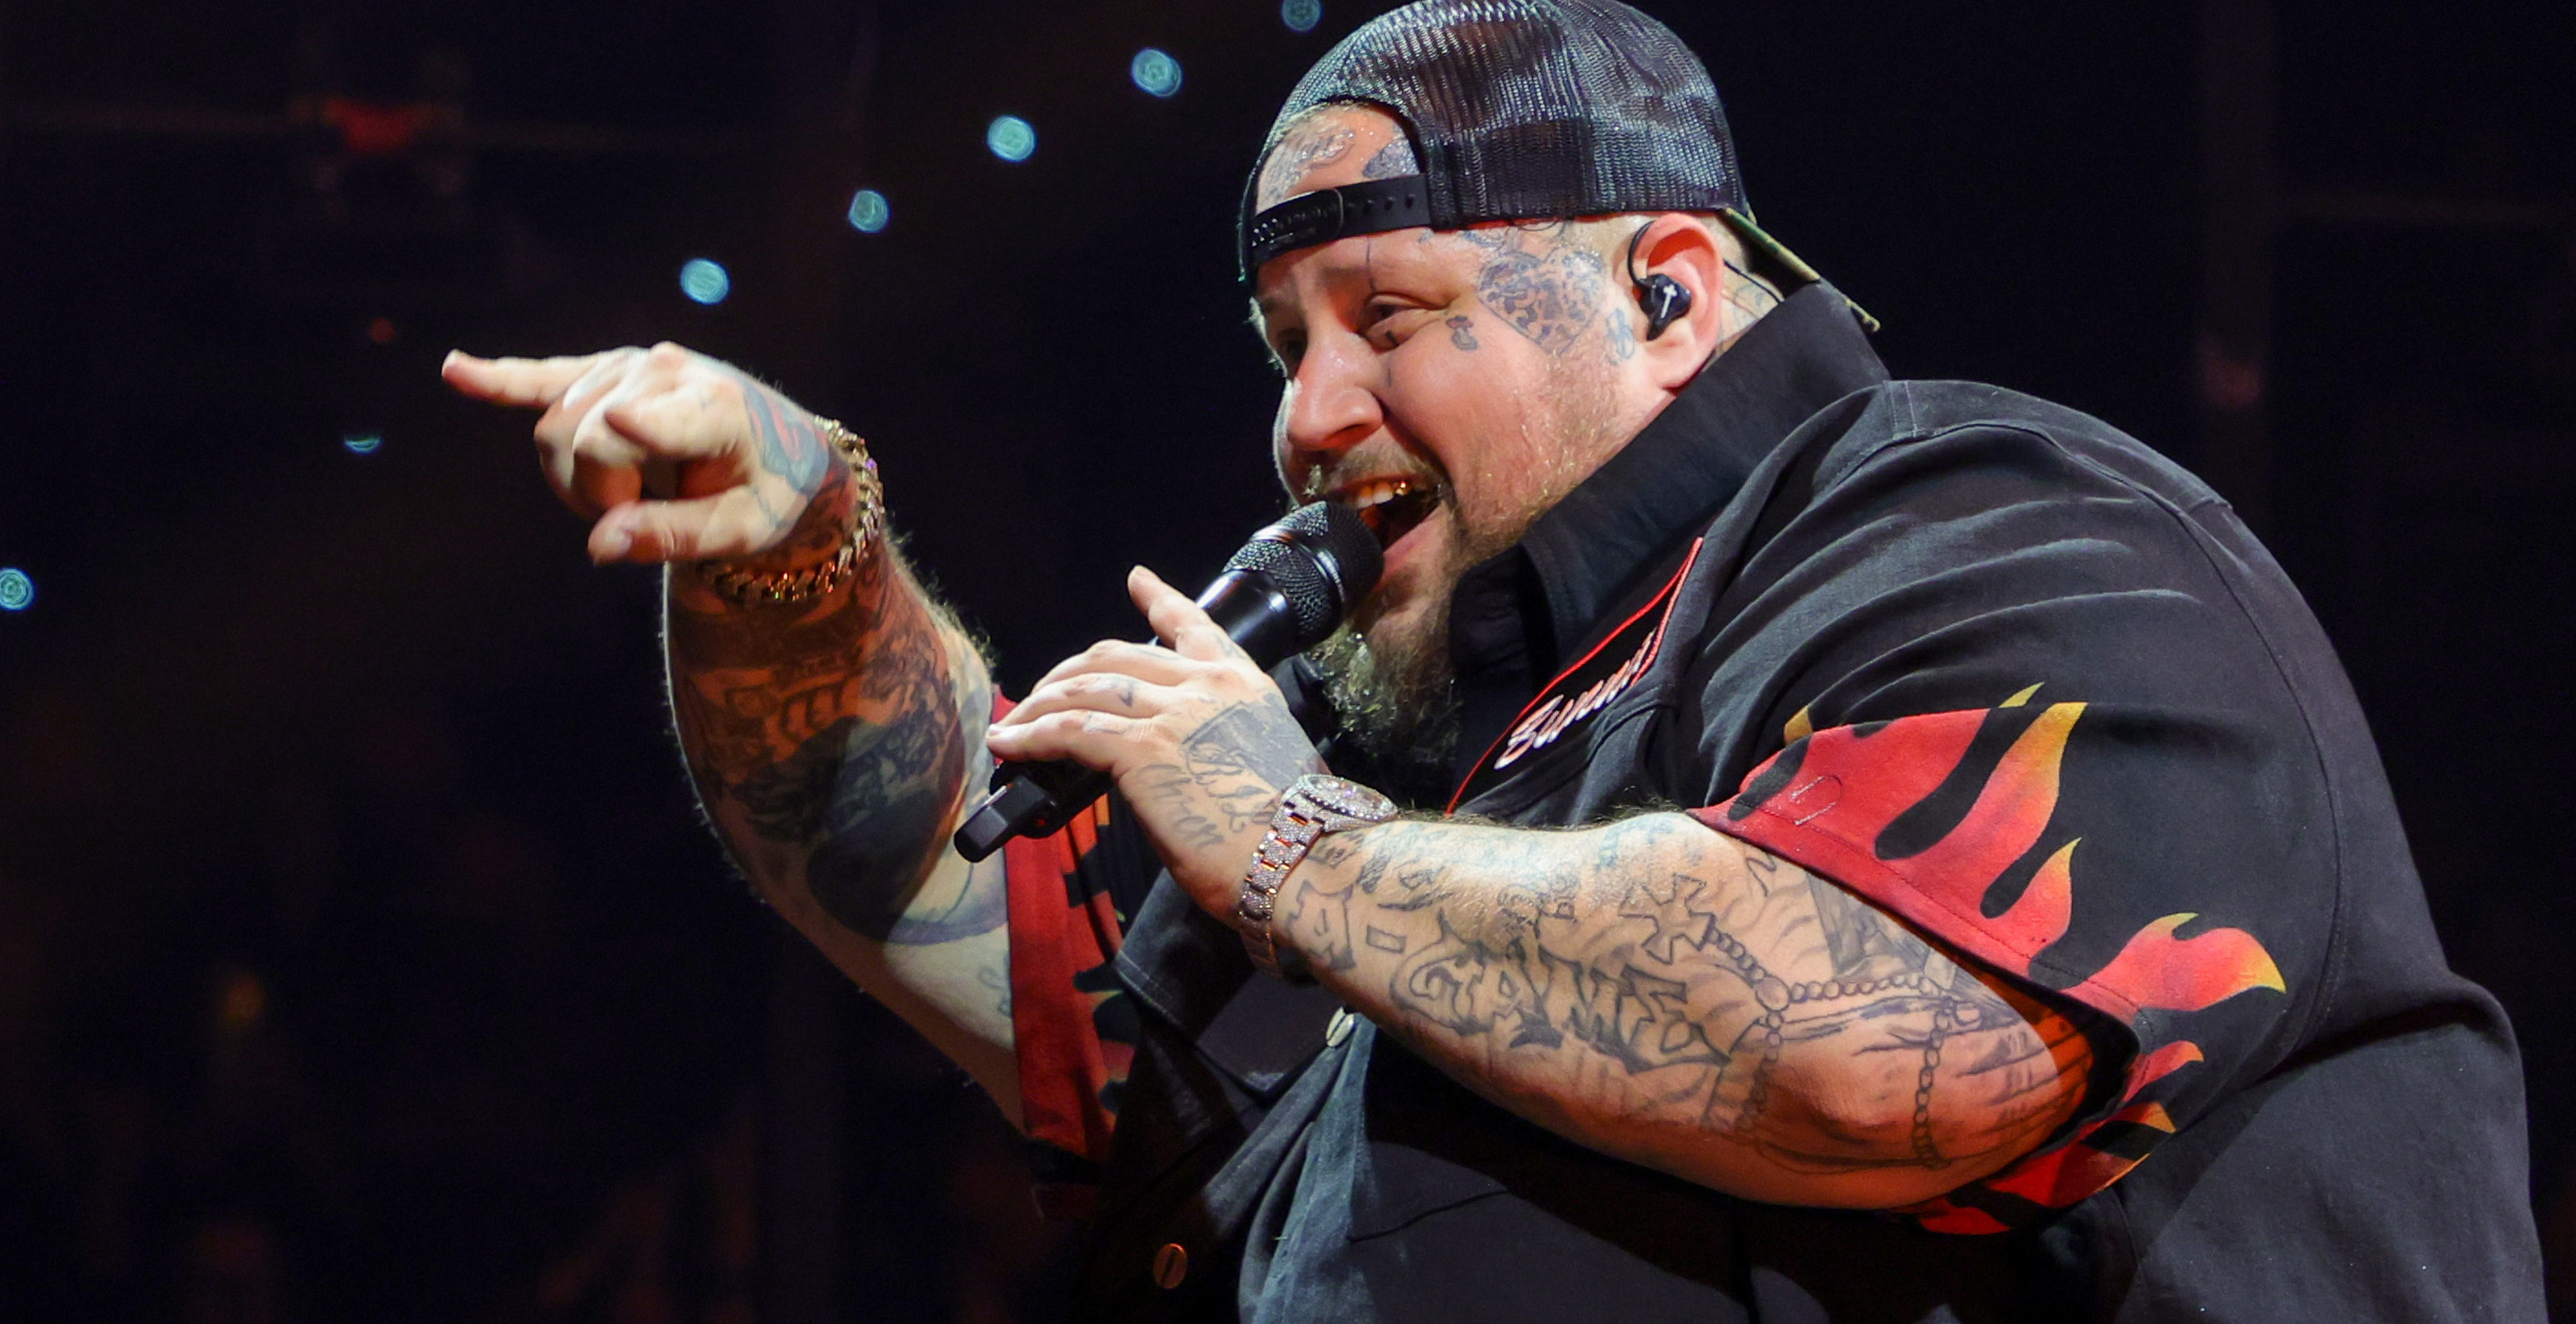 Jelly Roll's Past Run-Ins With The Law Is Preventing Him From Going On An International Tour